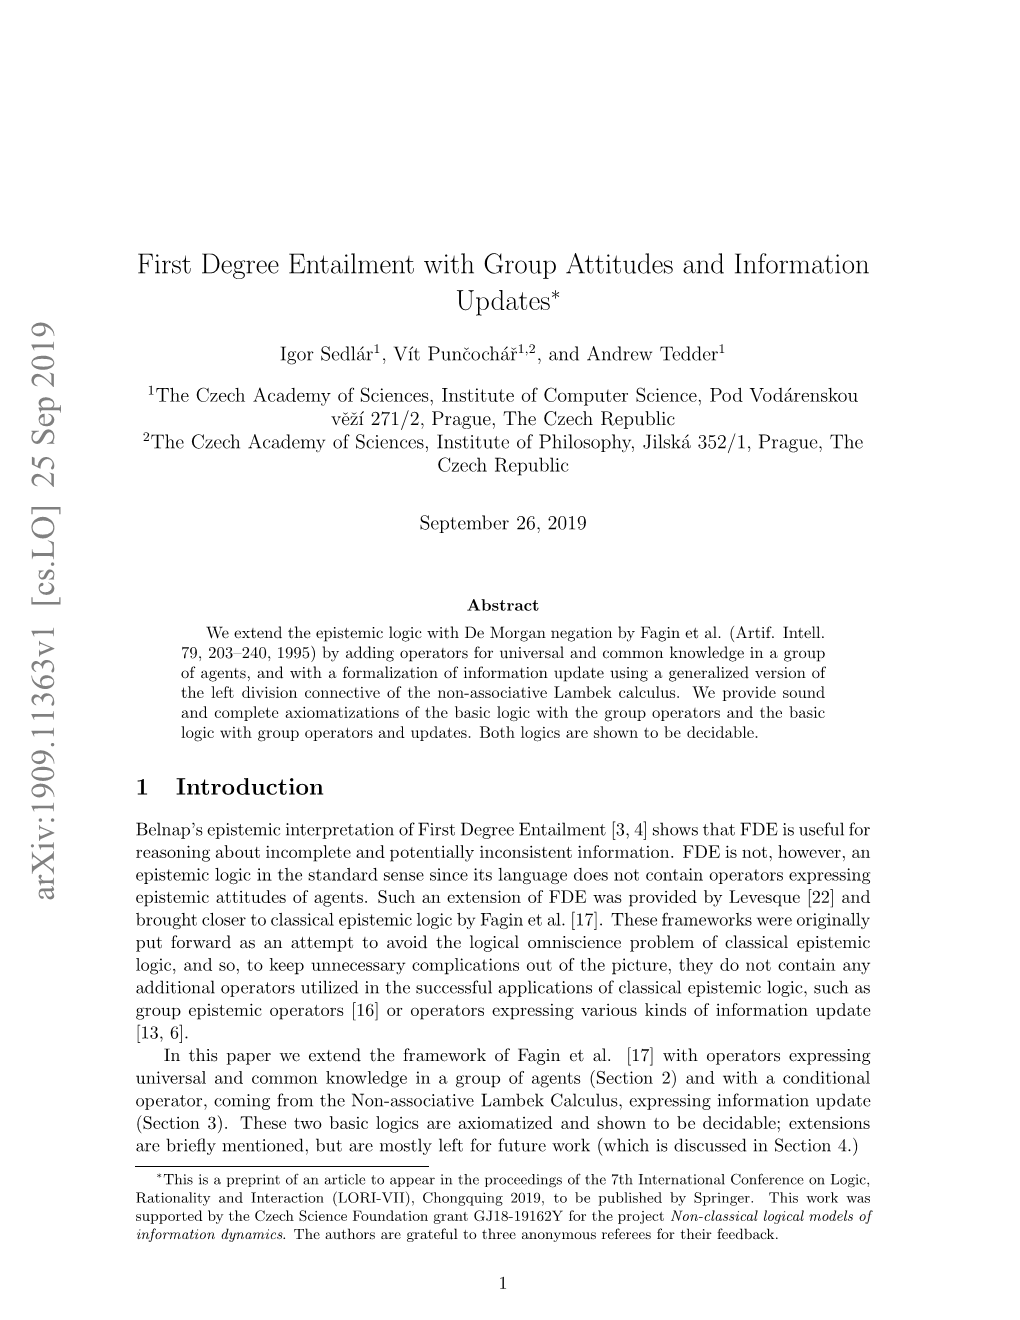 First Degree Entailment with Group Attitudes and Information Updates